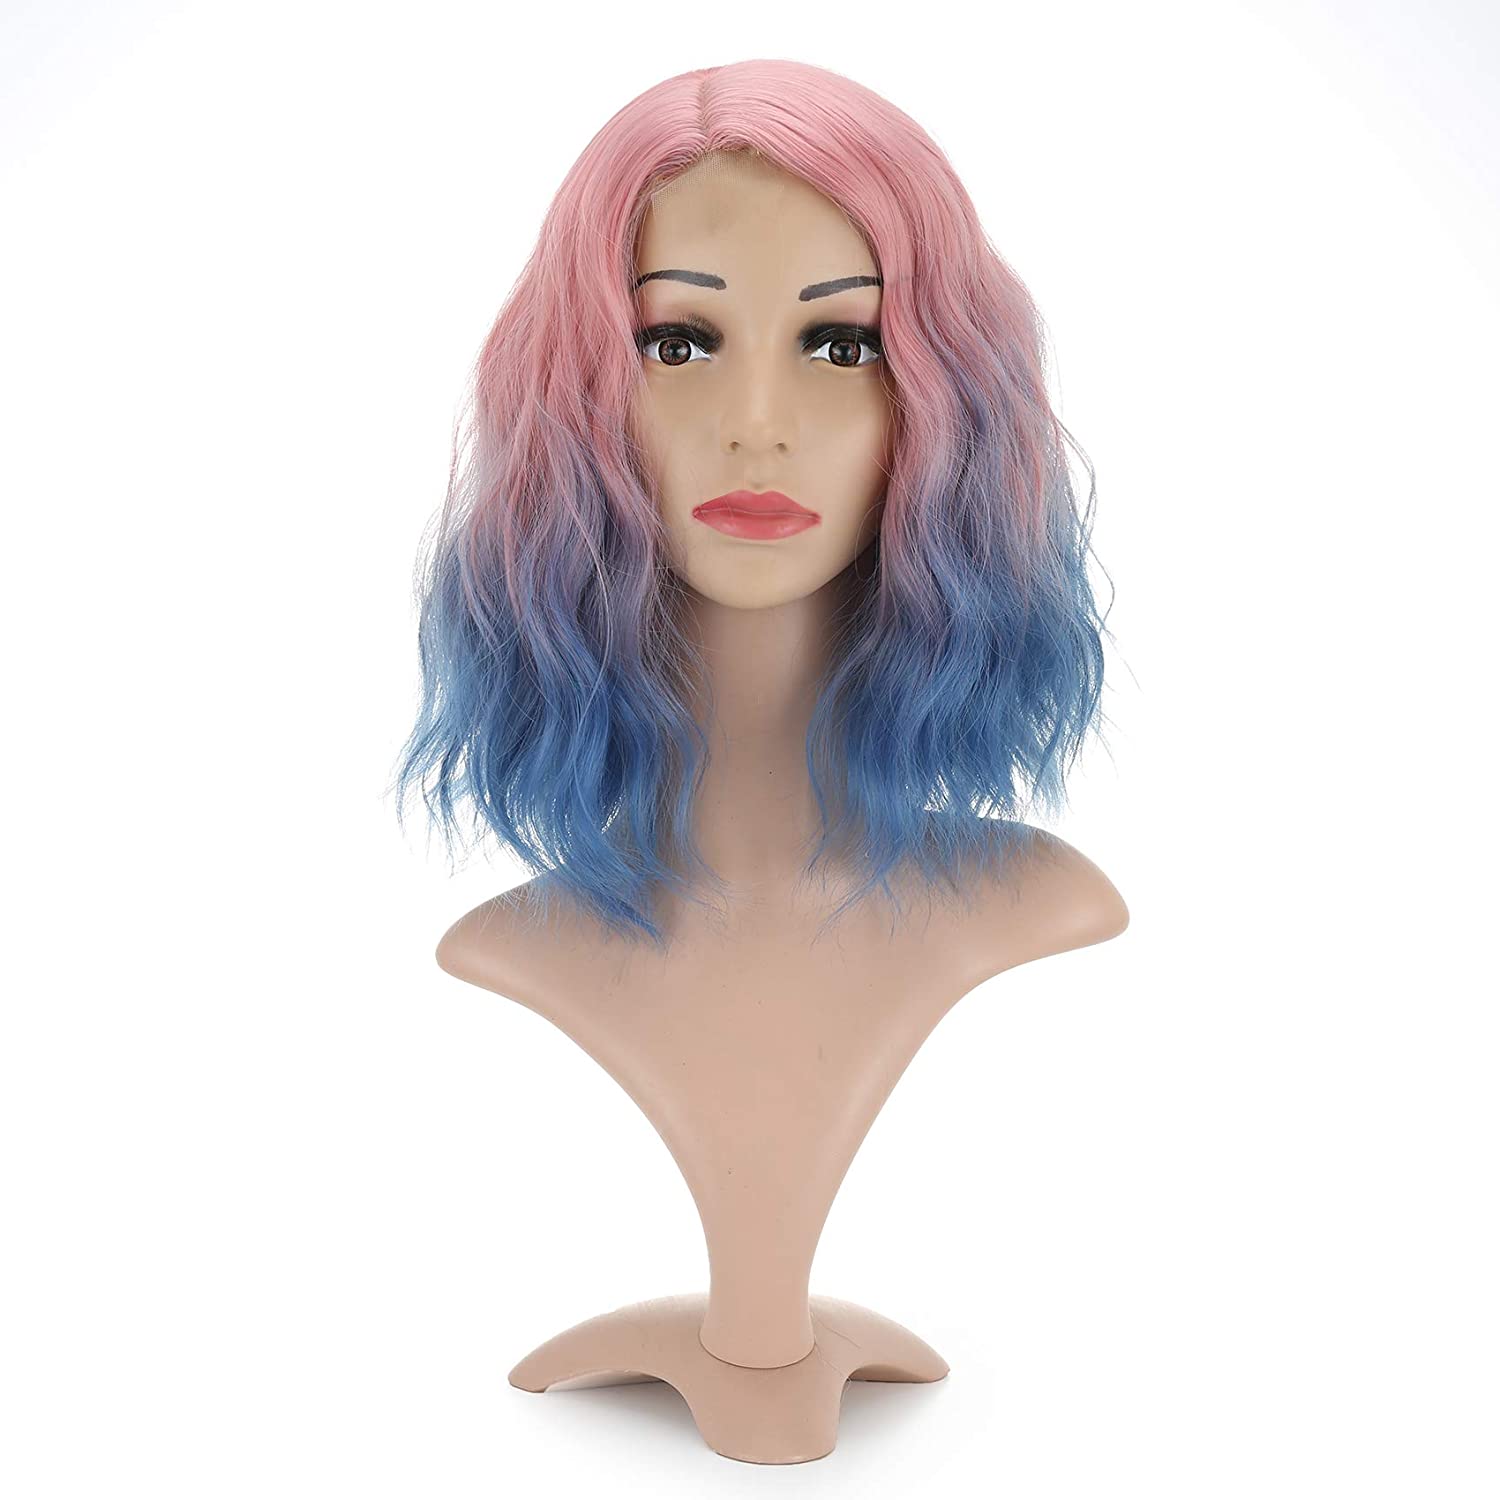 VCKOVCKO Lace Front Bob Ombre Wig